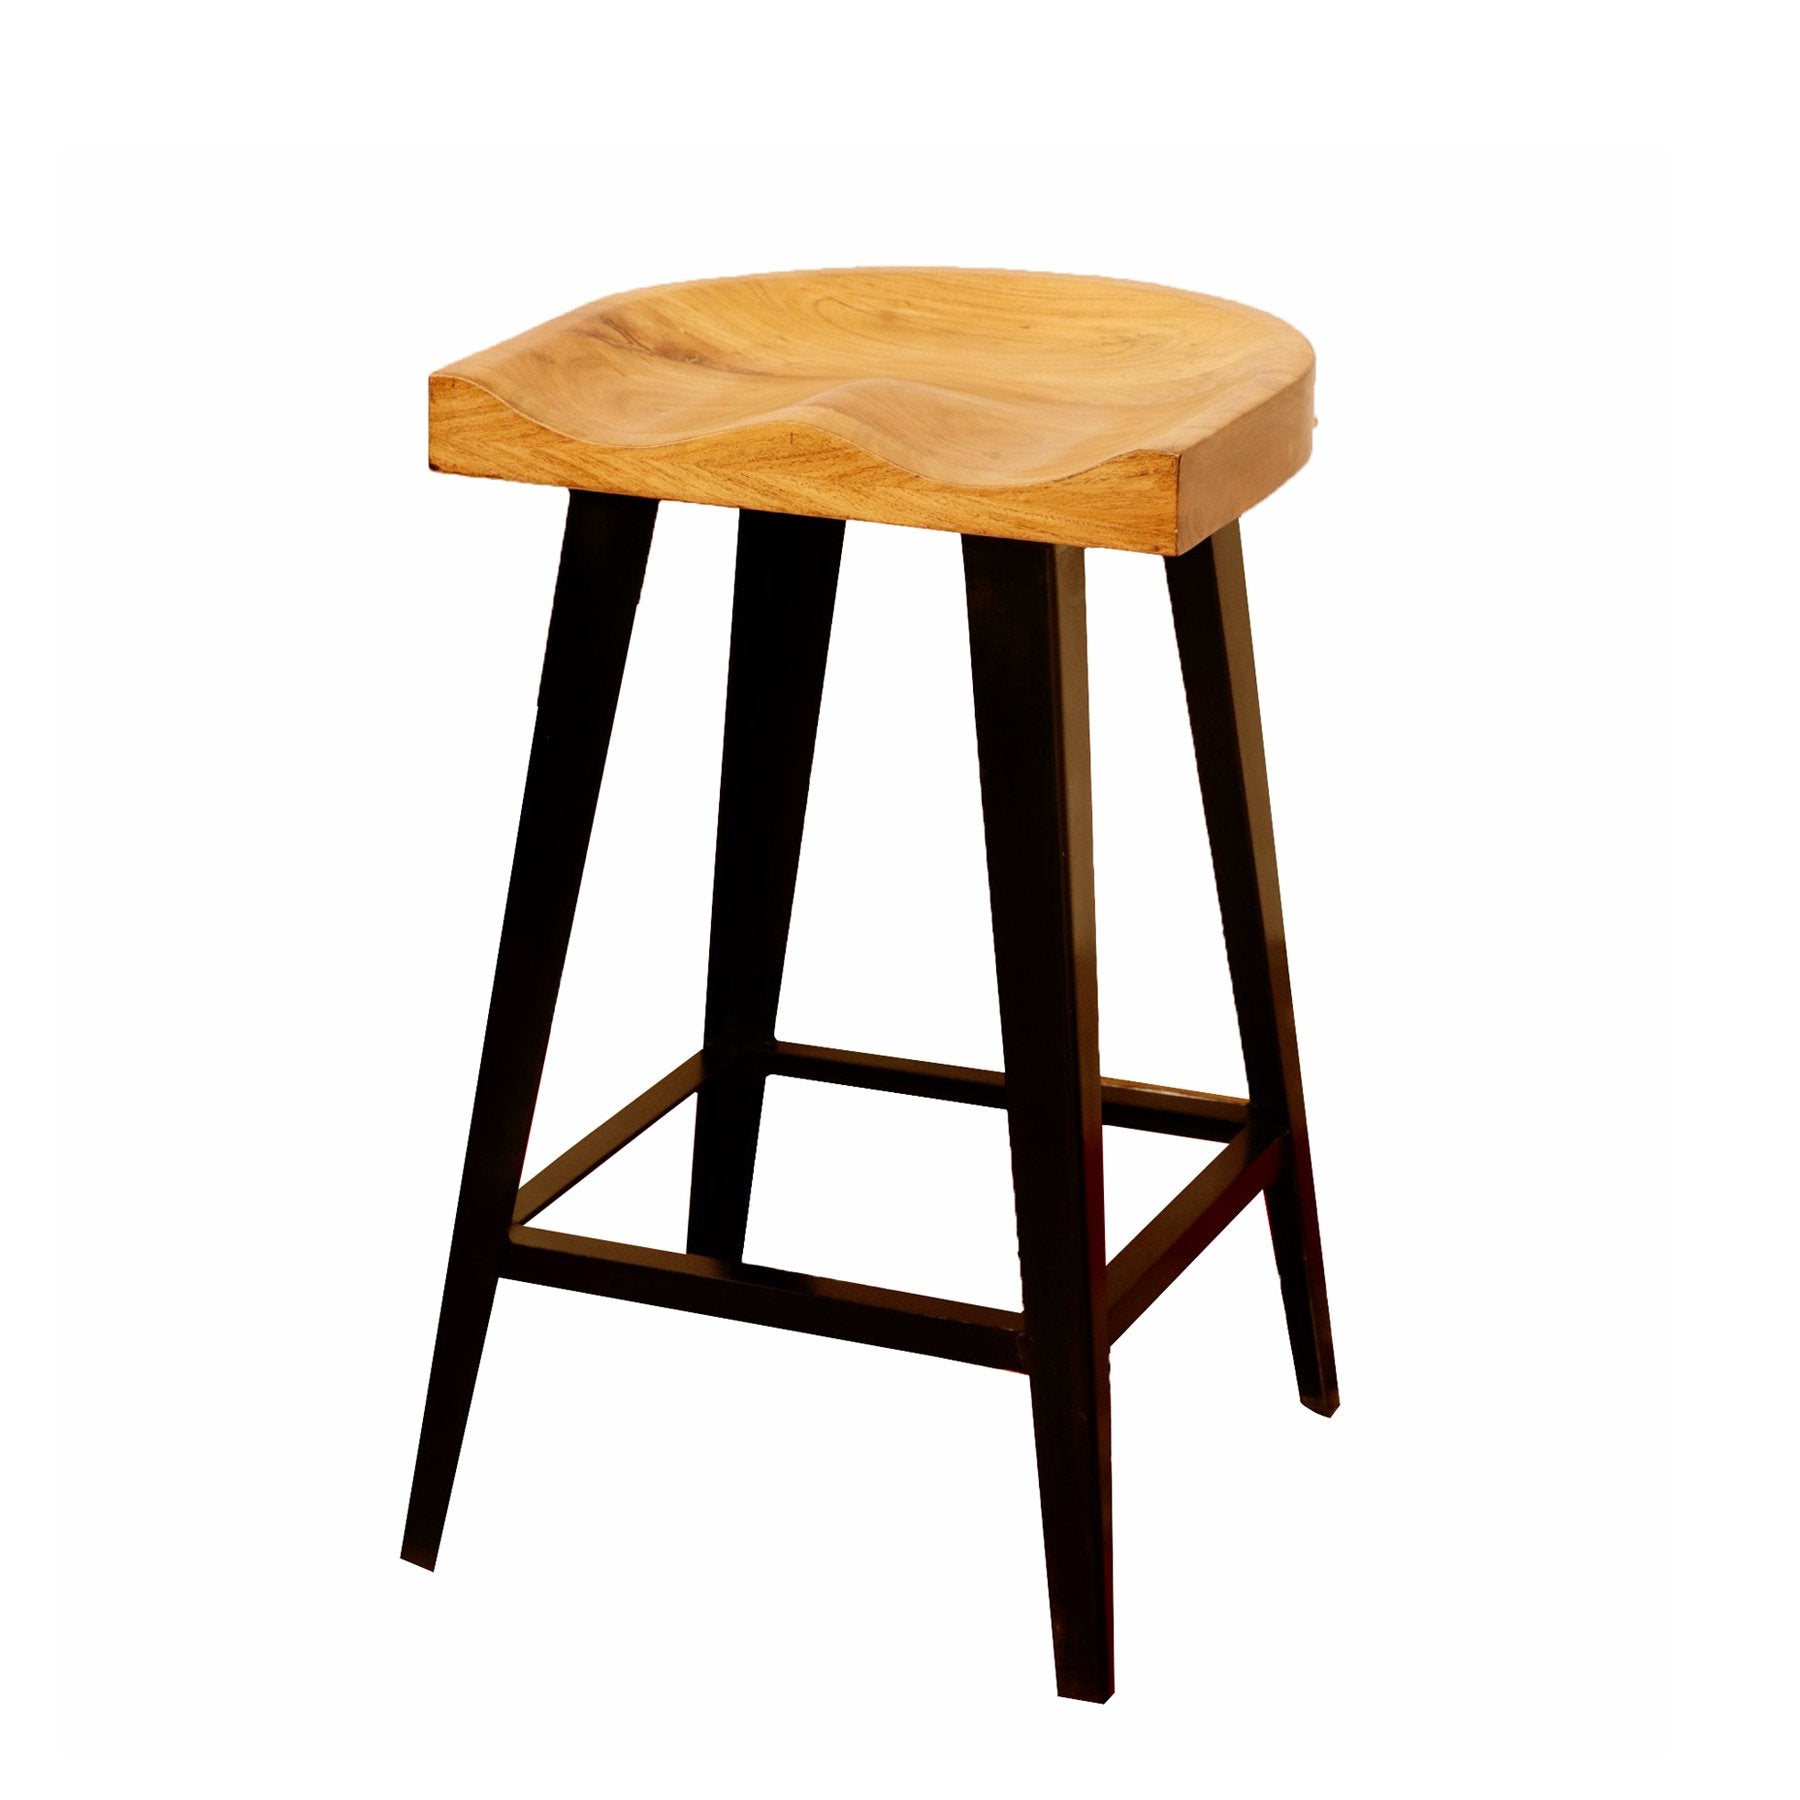 Comprehensive Guide to Picking Out the Perfect Wooden Stool